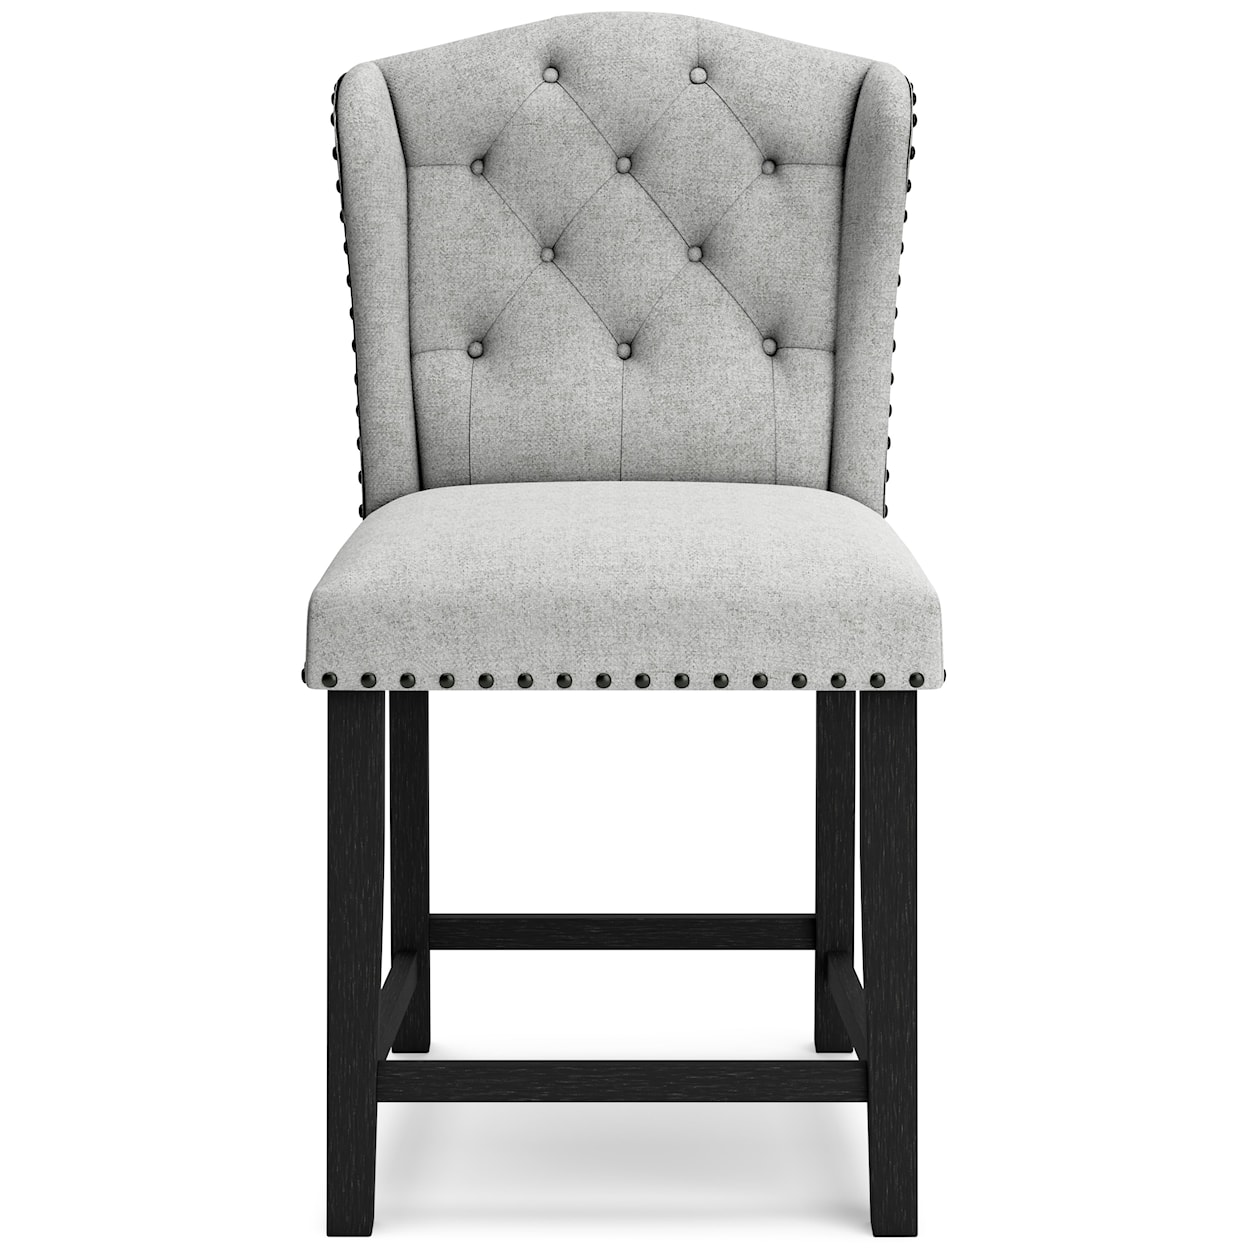 Signature Design by Ashley Furniture Jeanette Counter Height Bar Stool